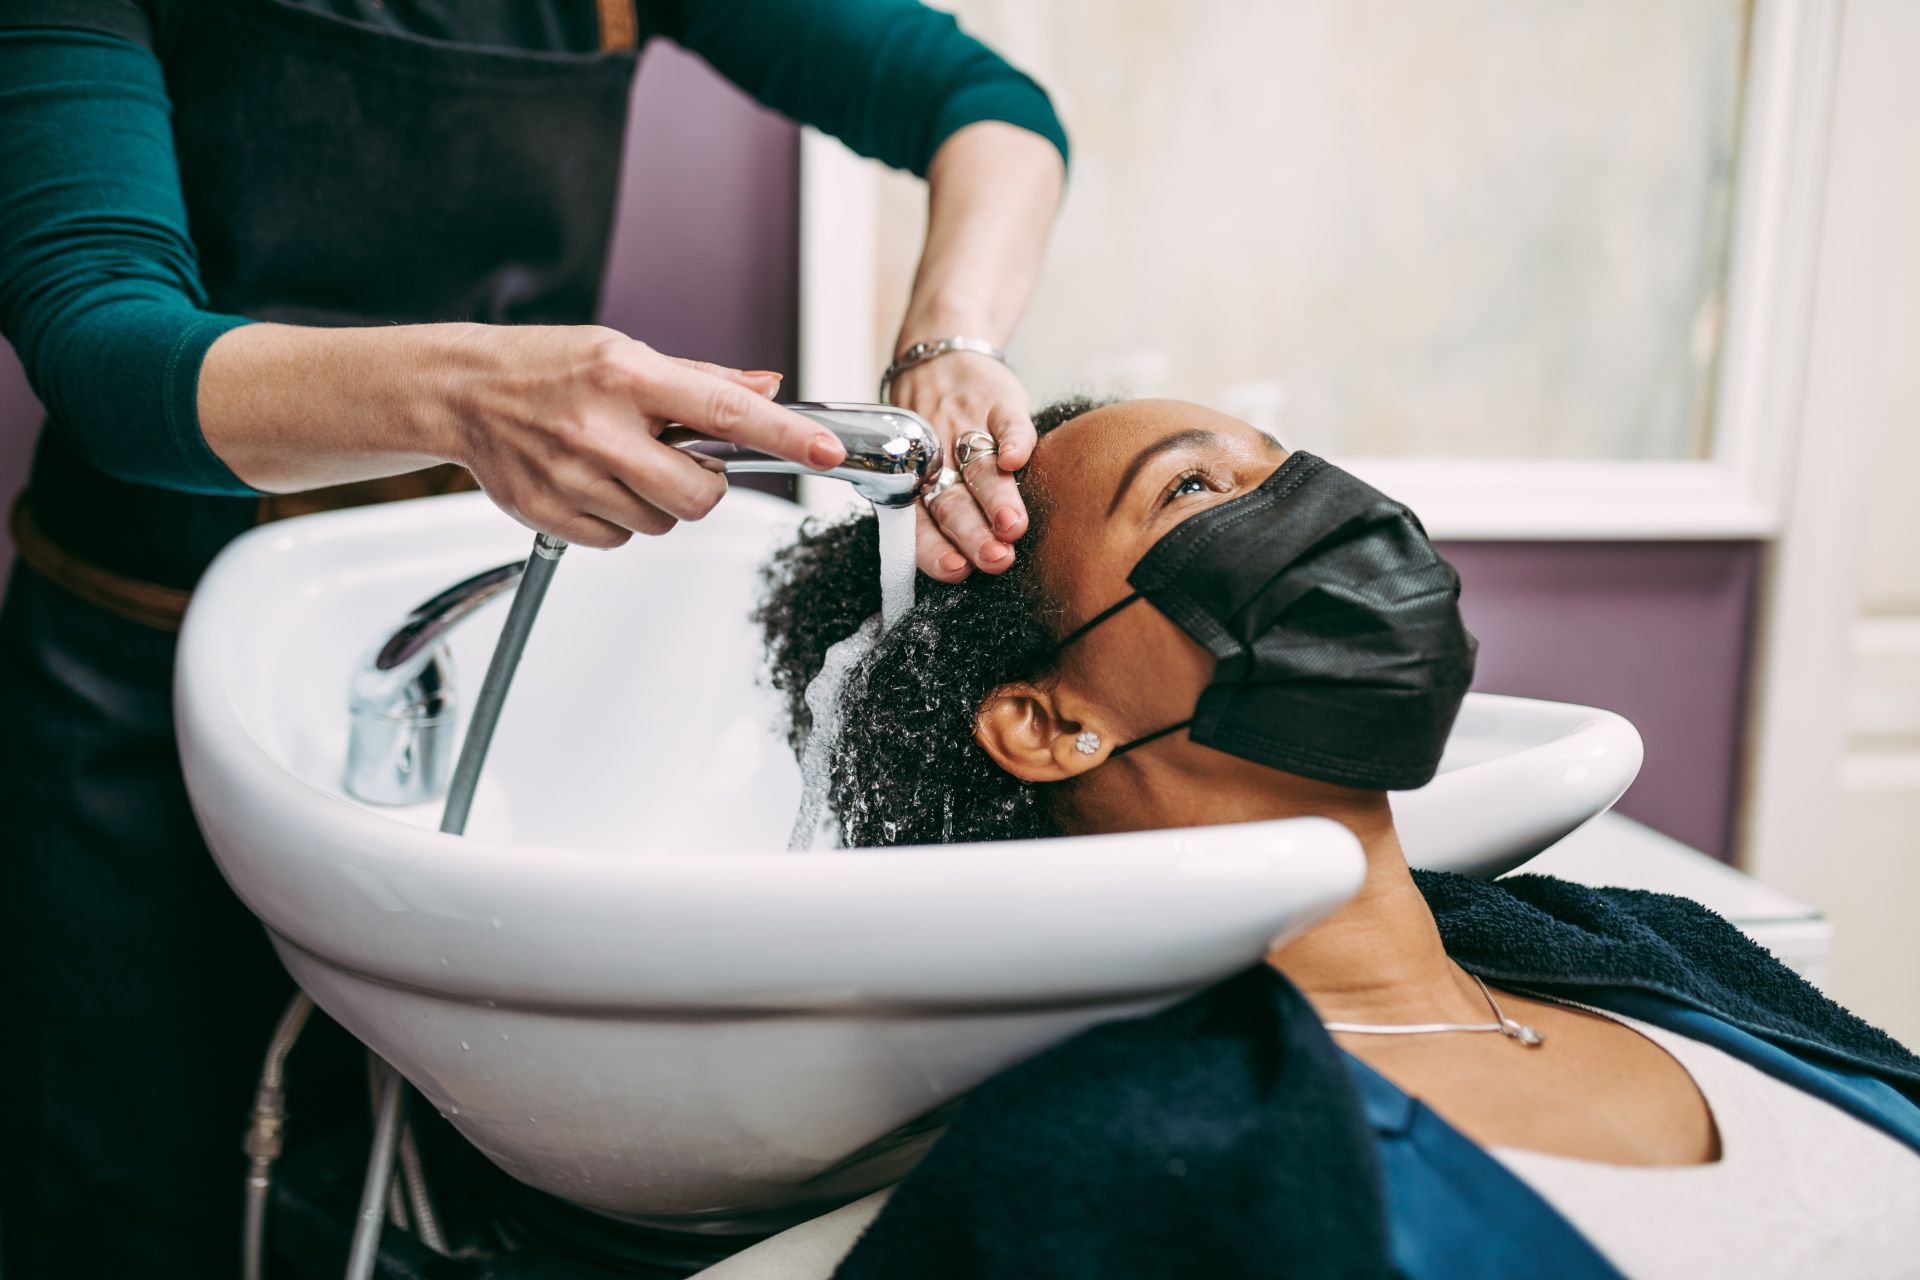 A woman with natural hair getting her hair washed at the salon